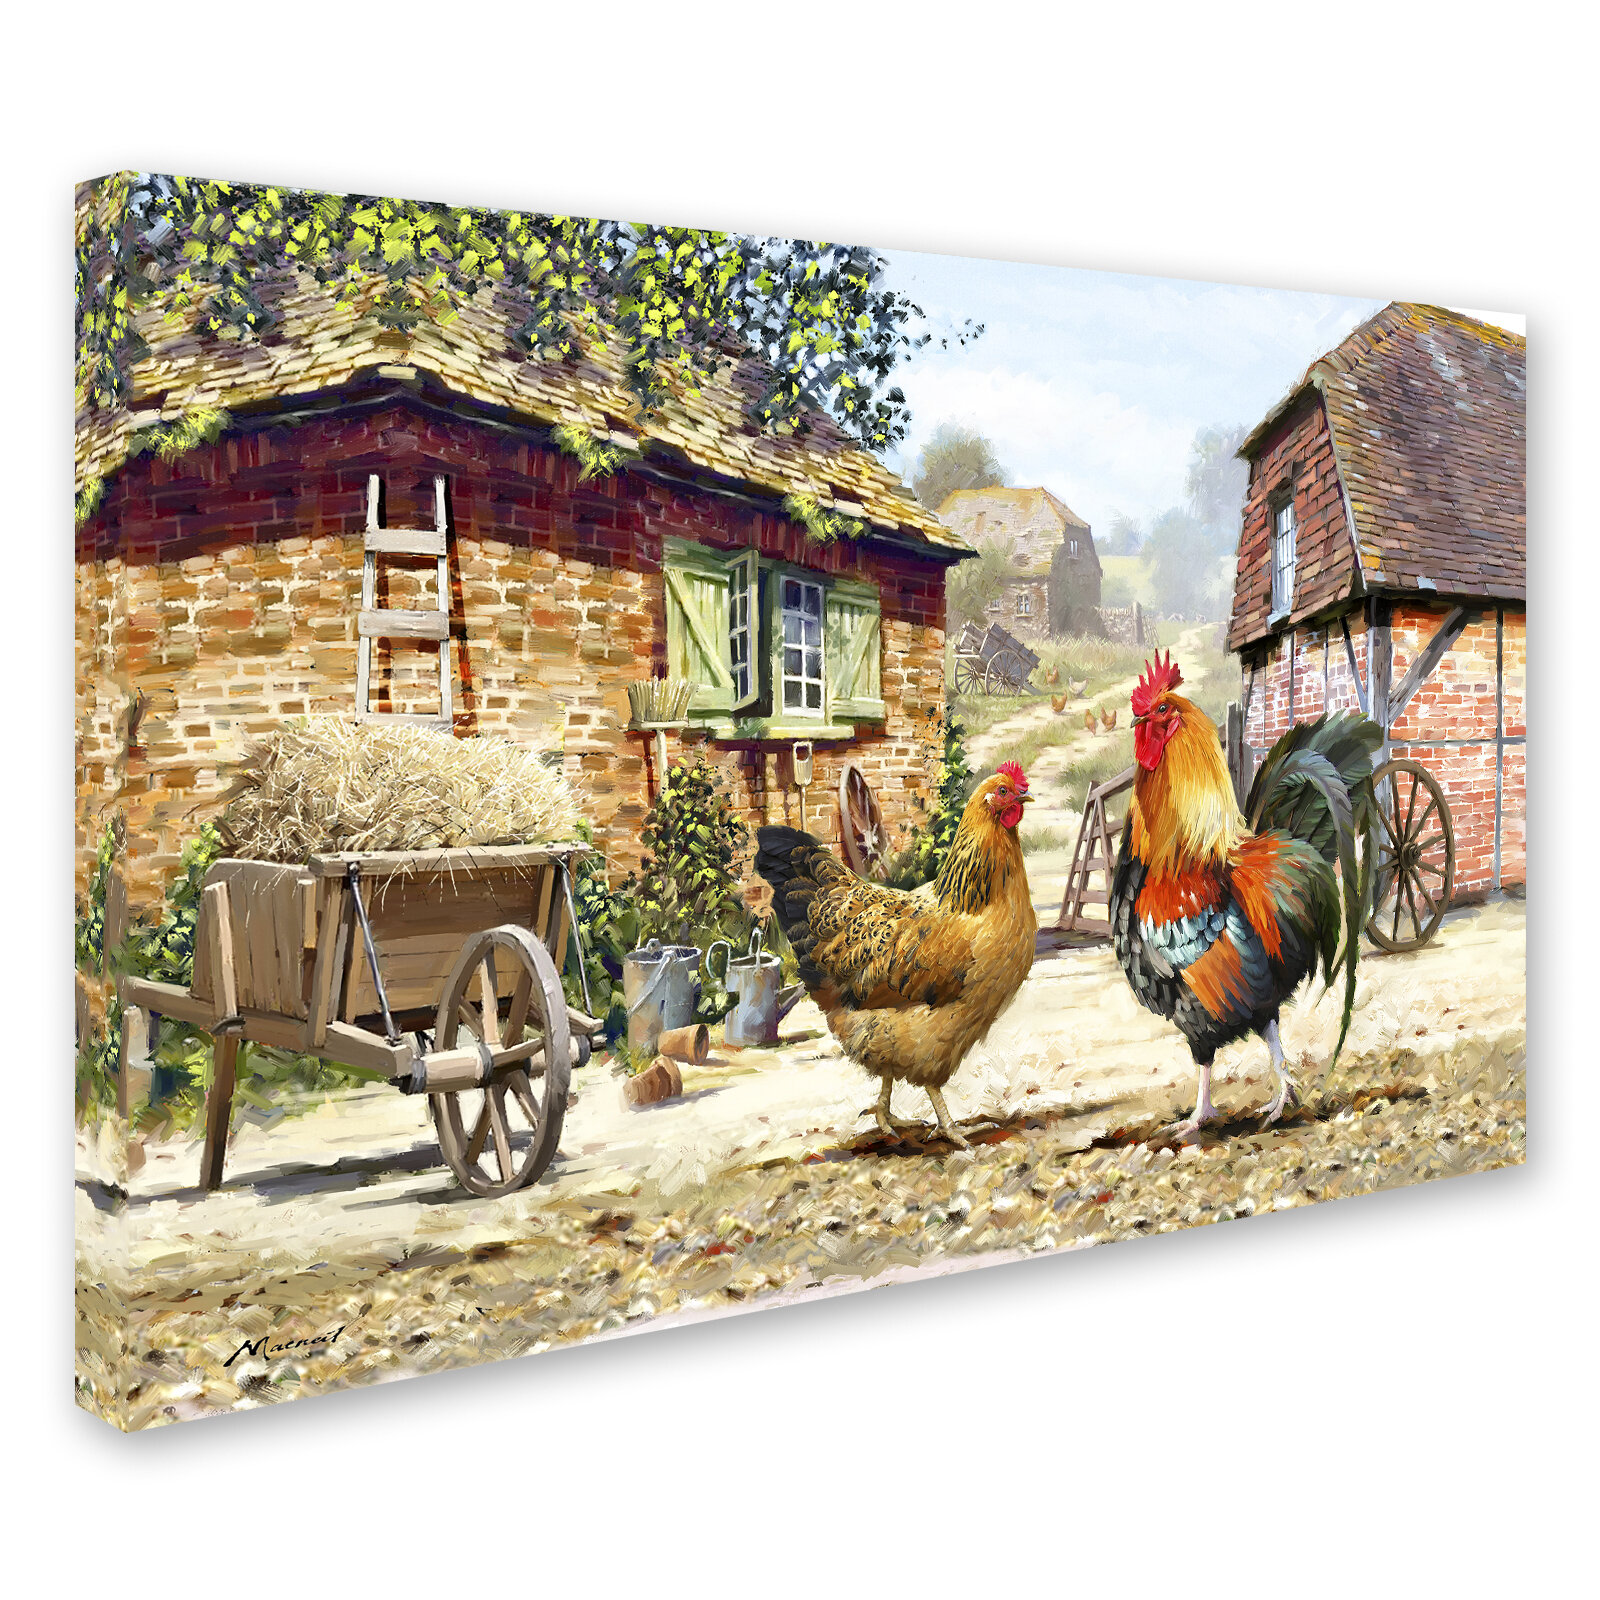 Chicken Hen with chicks Provence France For sale as Framed Prints